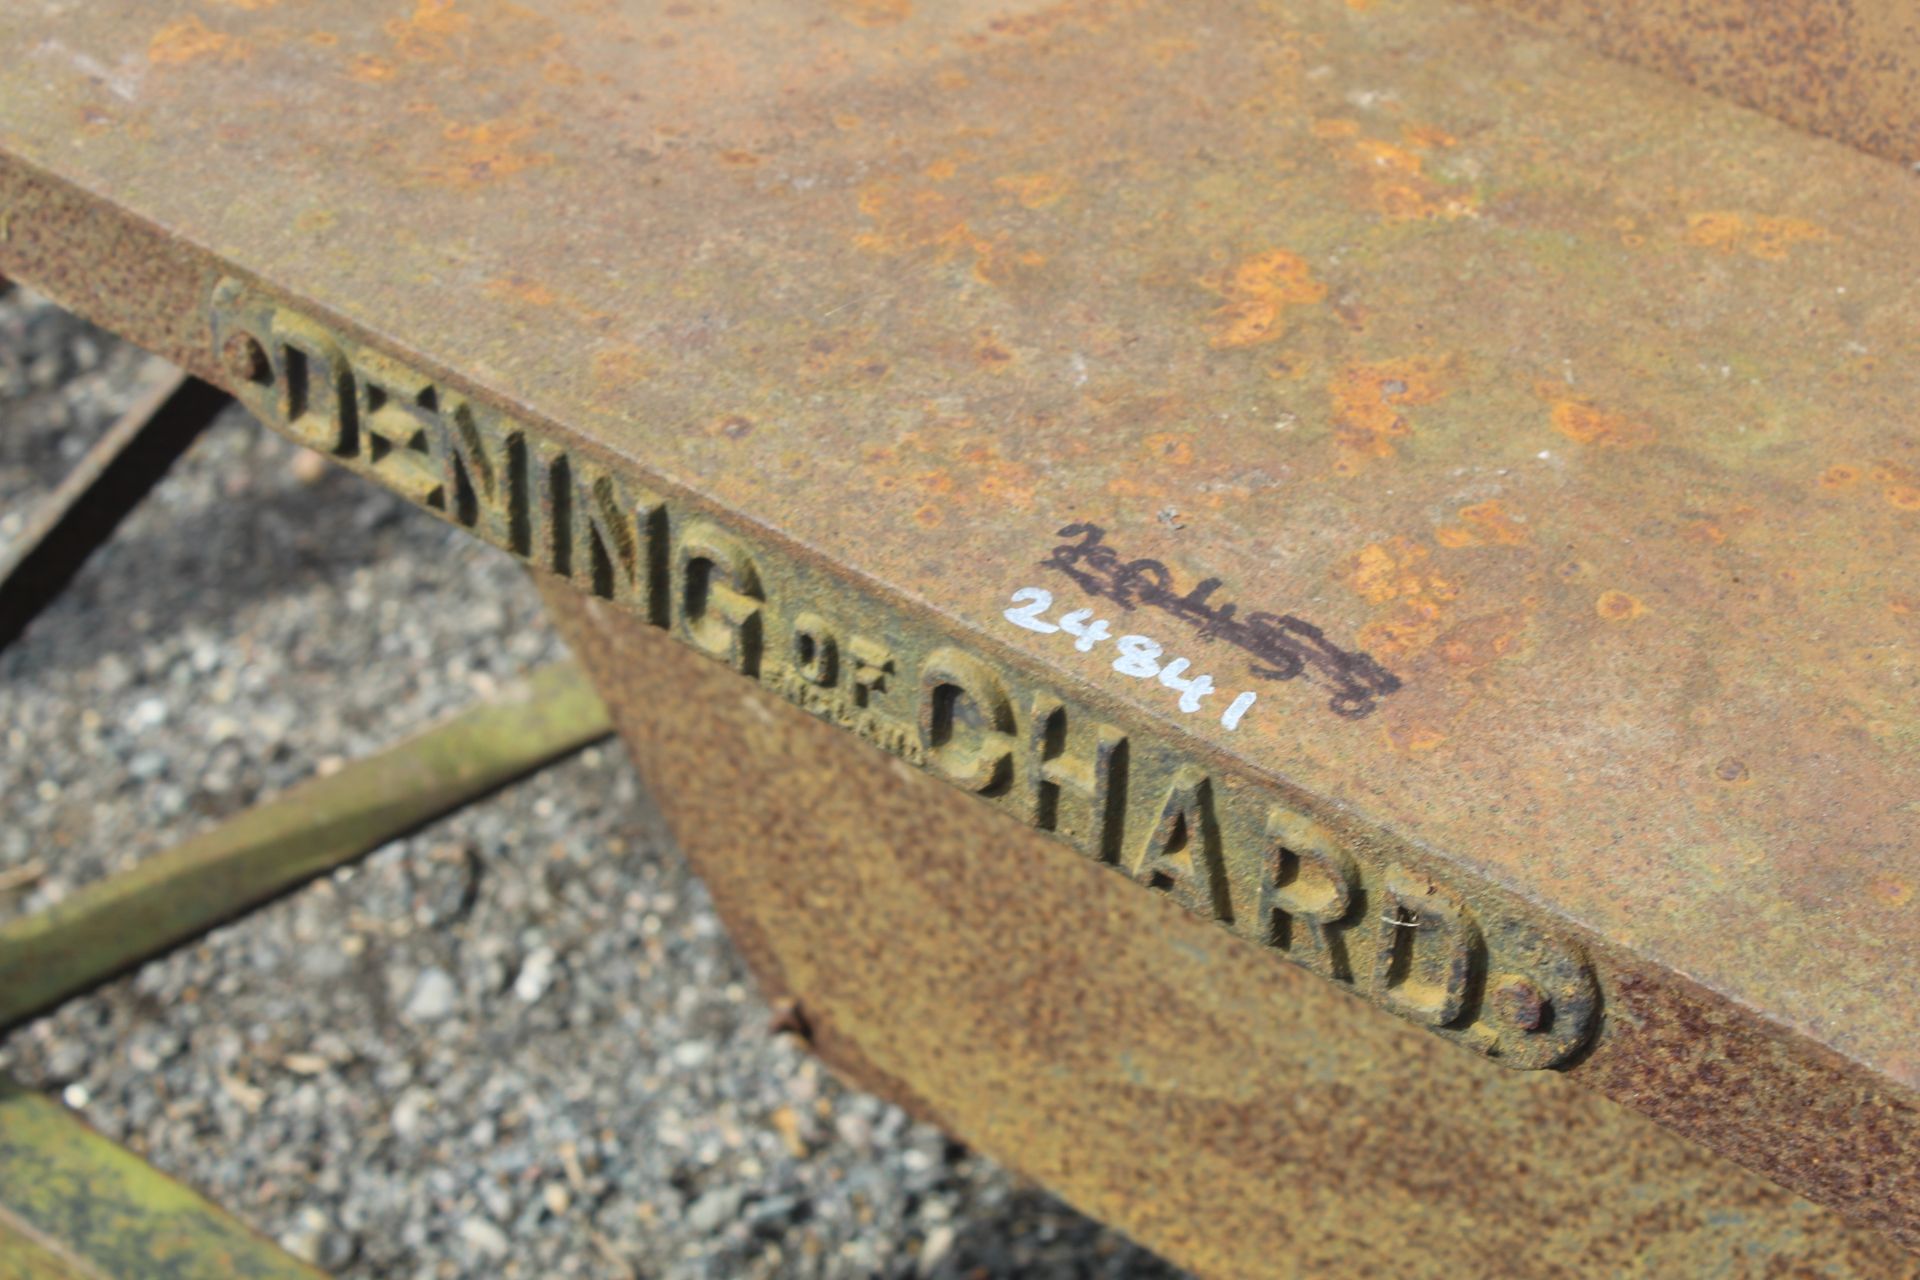 Dening of Chard PTO saw bench. - Image 8 of 8